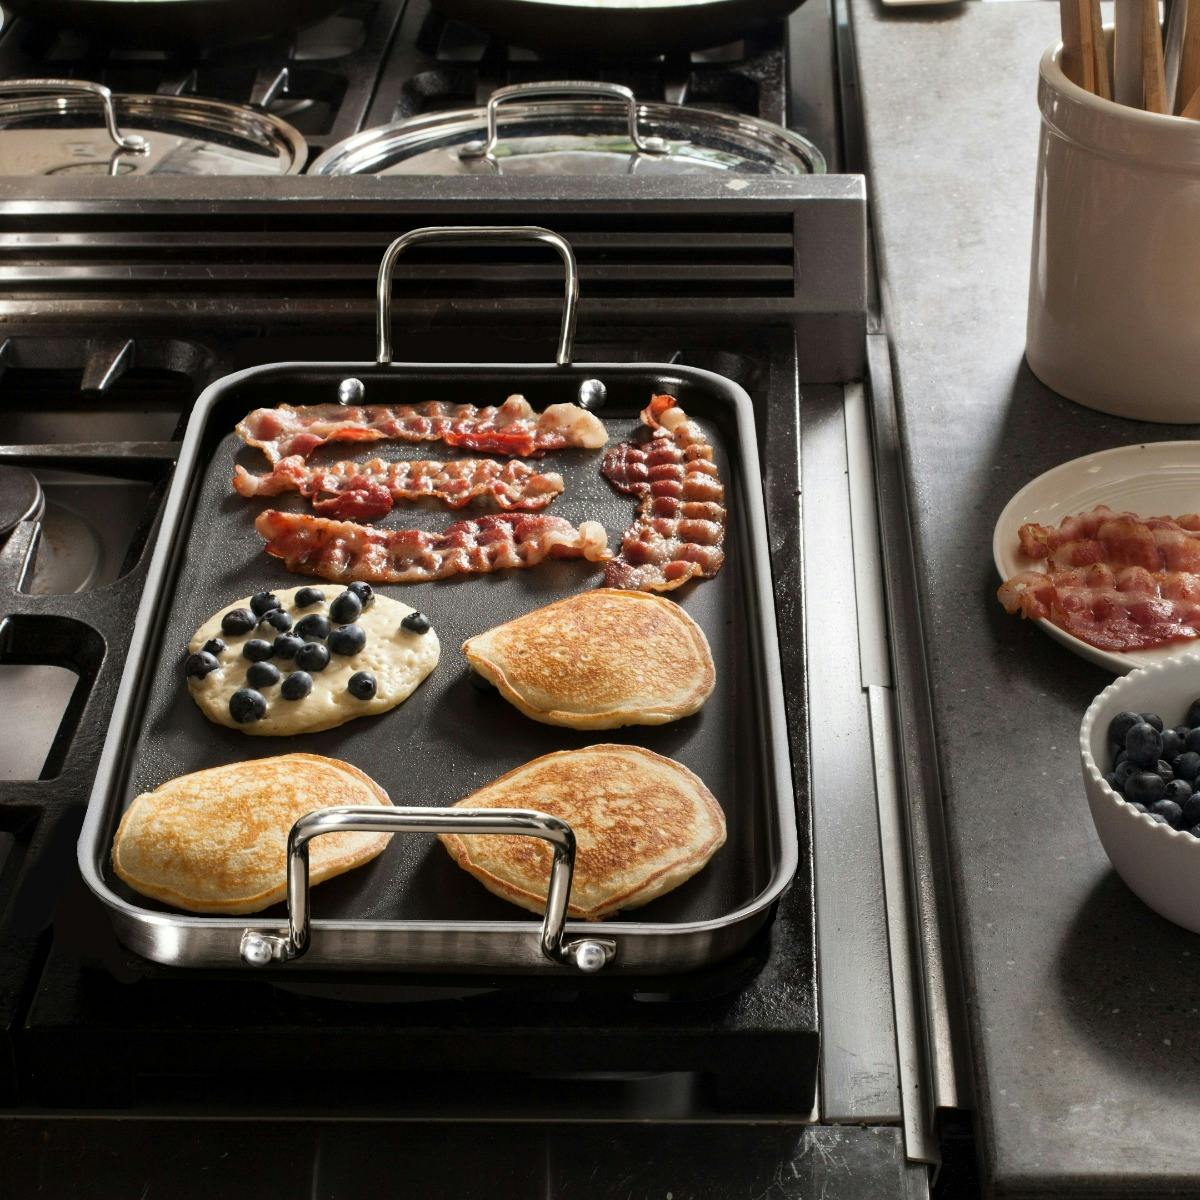 Cuisinart Chef's Classic Nonstick Hard-Anodized Double Burner Griddle